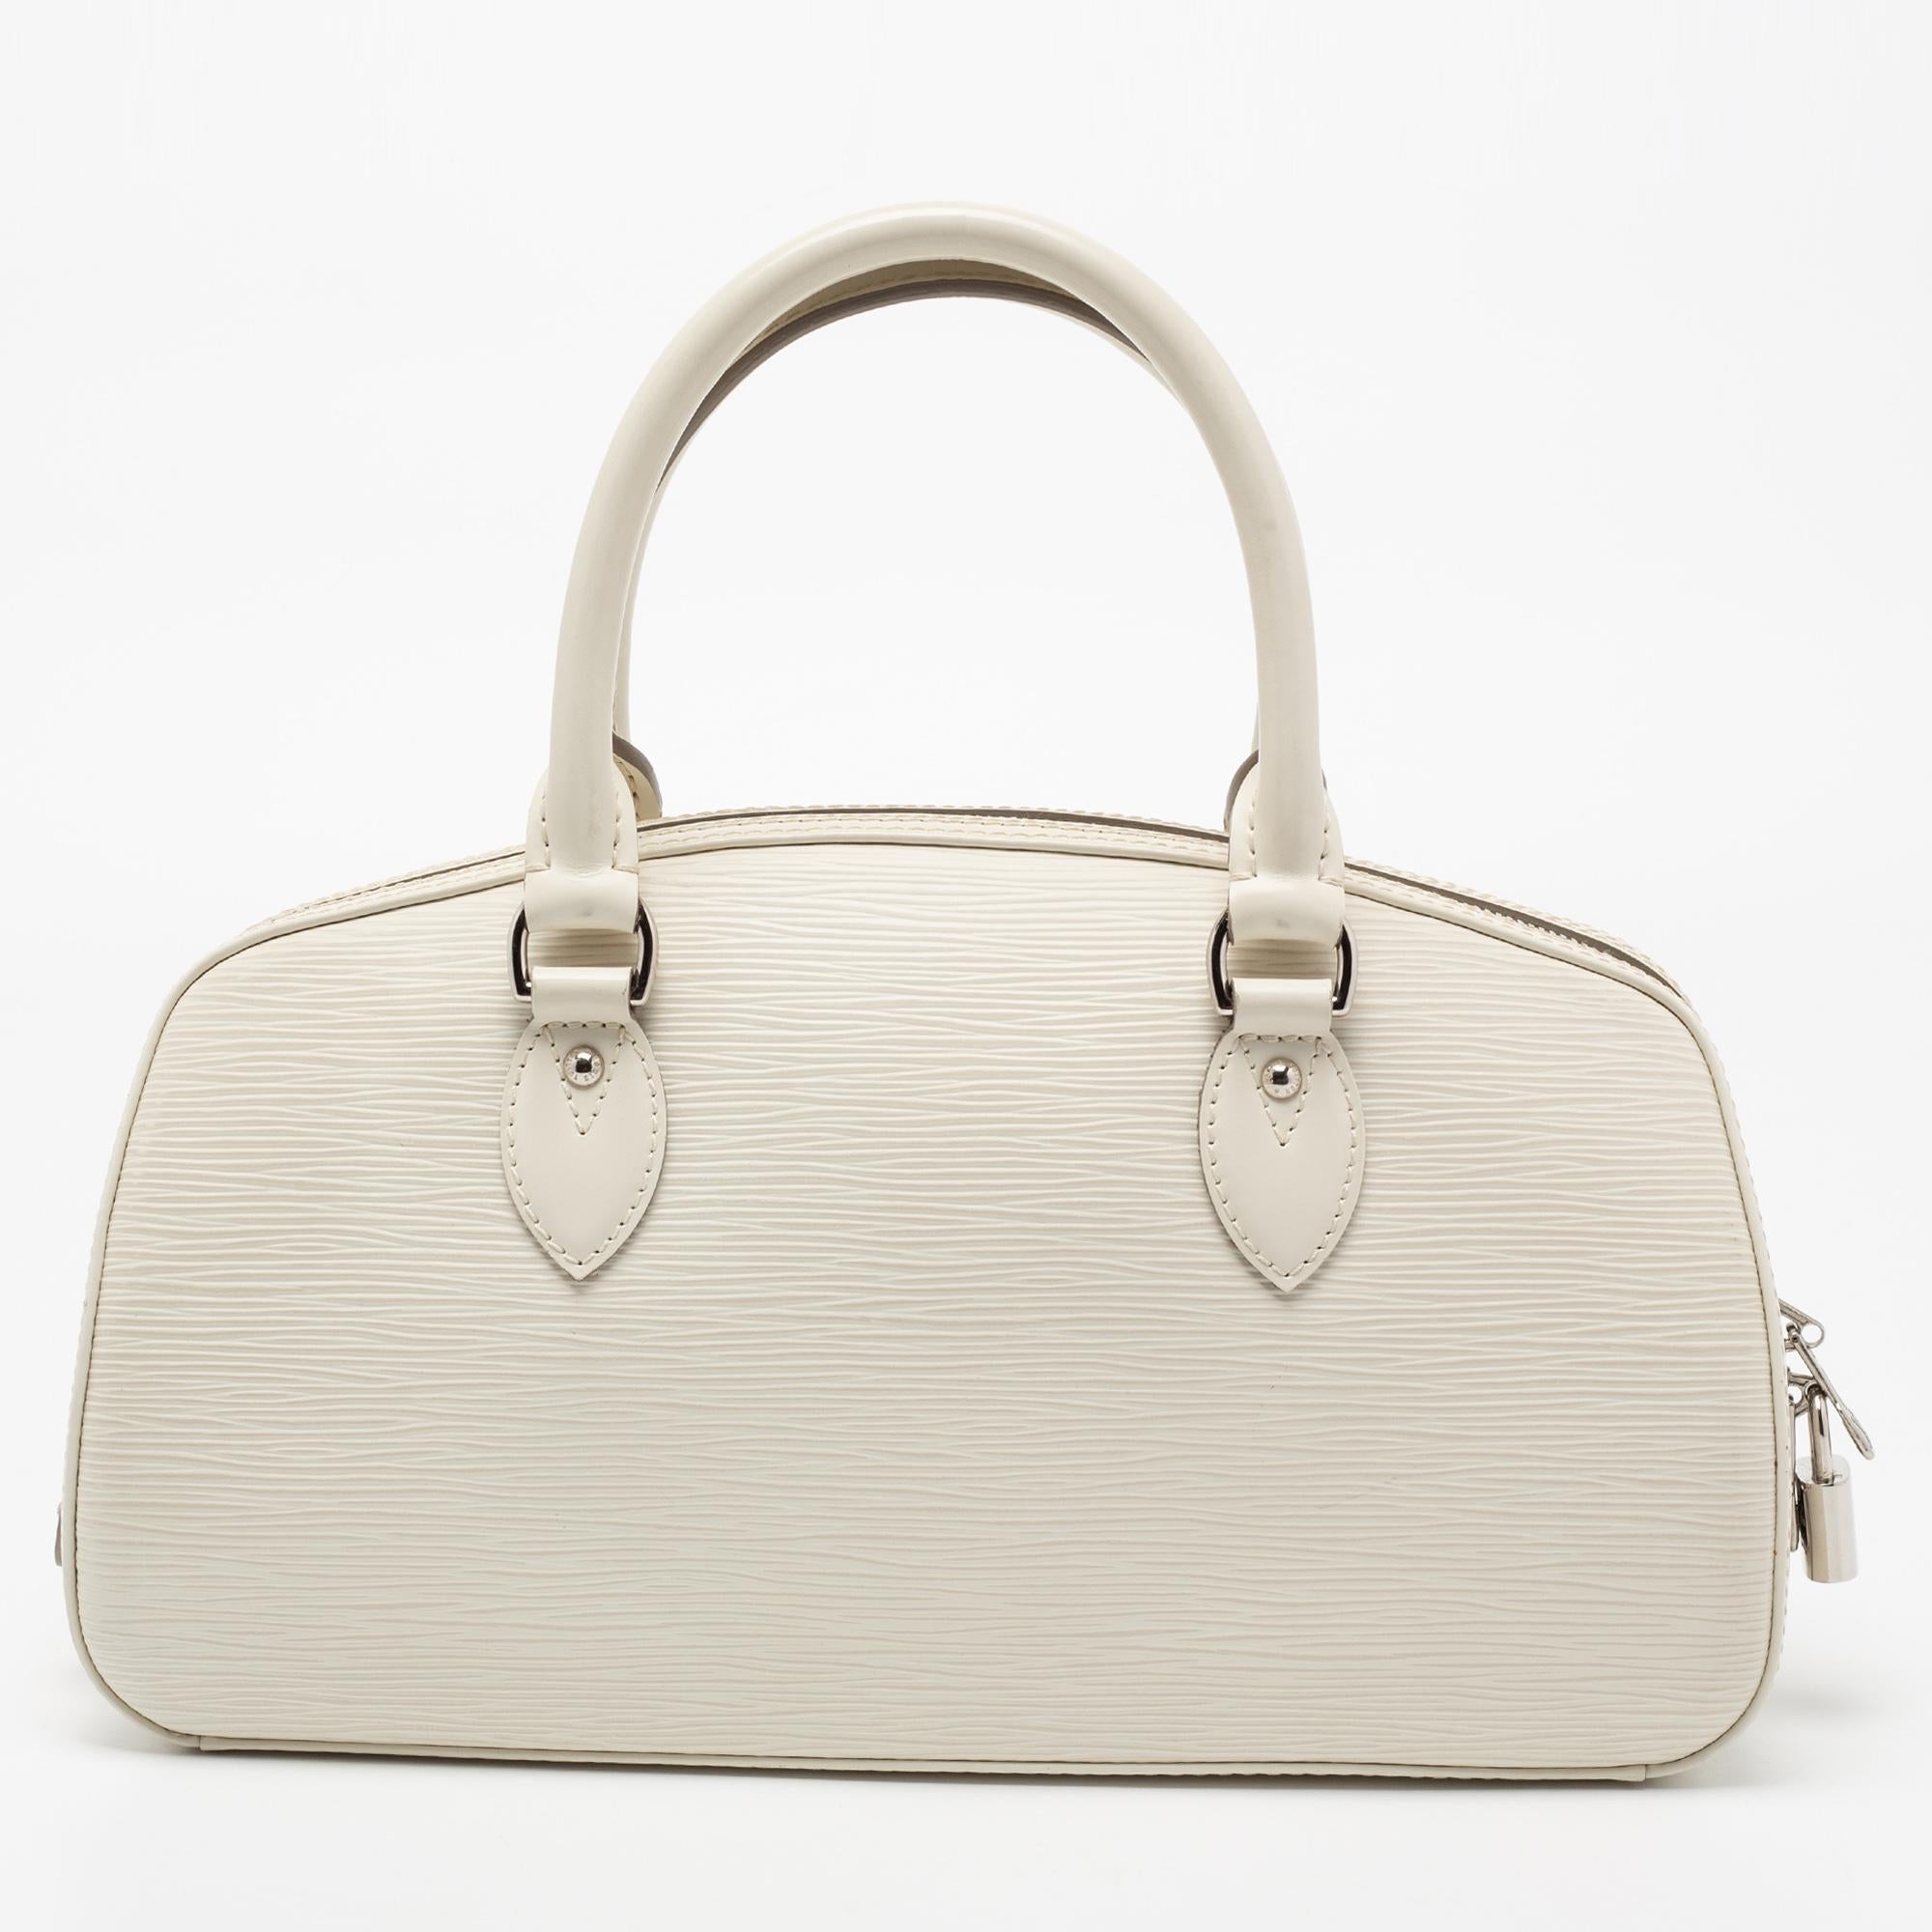 An essential wardrobe accessory, this Louis Vuitton handbag is a must-have. Crafted from smooth Epi leather, this bag is styled with a zip closure that reveals a spacious Alcantara interior. It is finished with dual handles and silver-tone hardware.